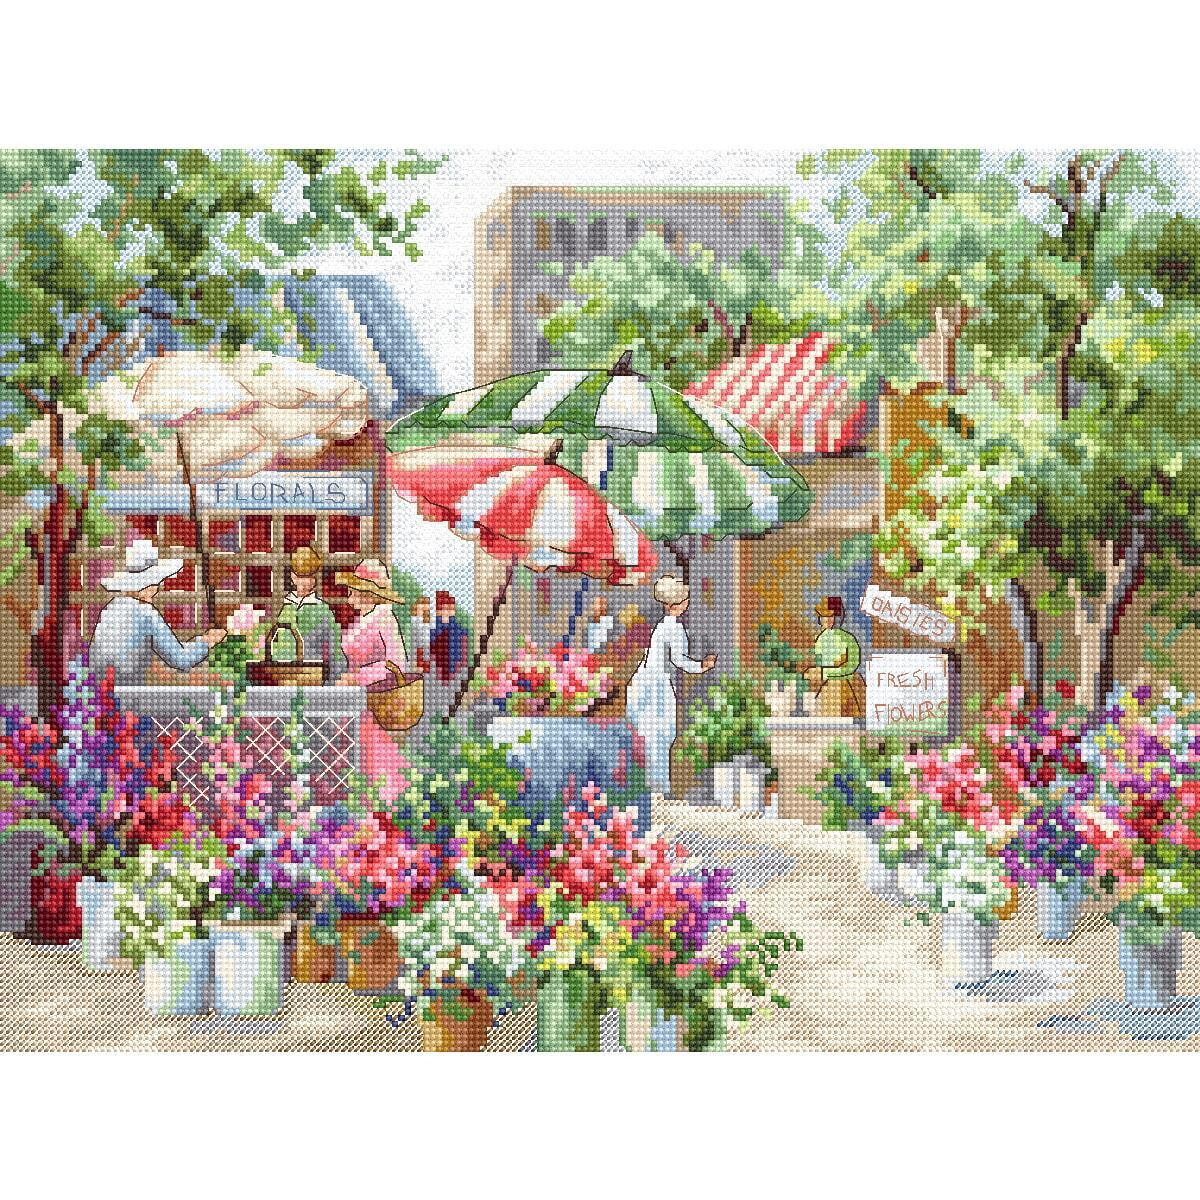 A lively outdoor market scene shows flower stalls with...